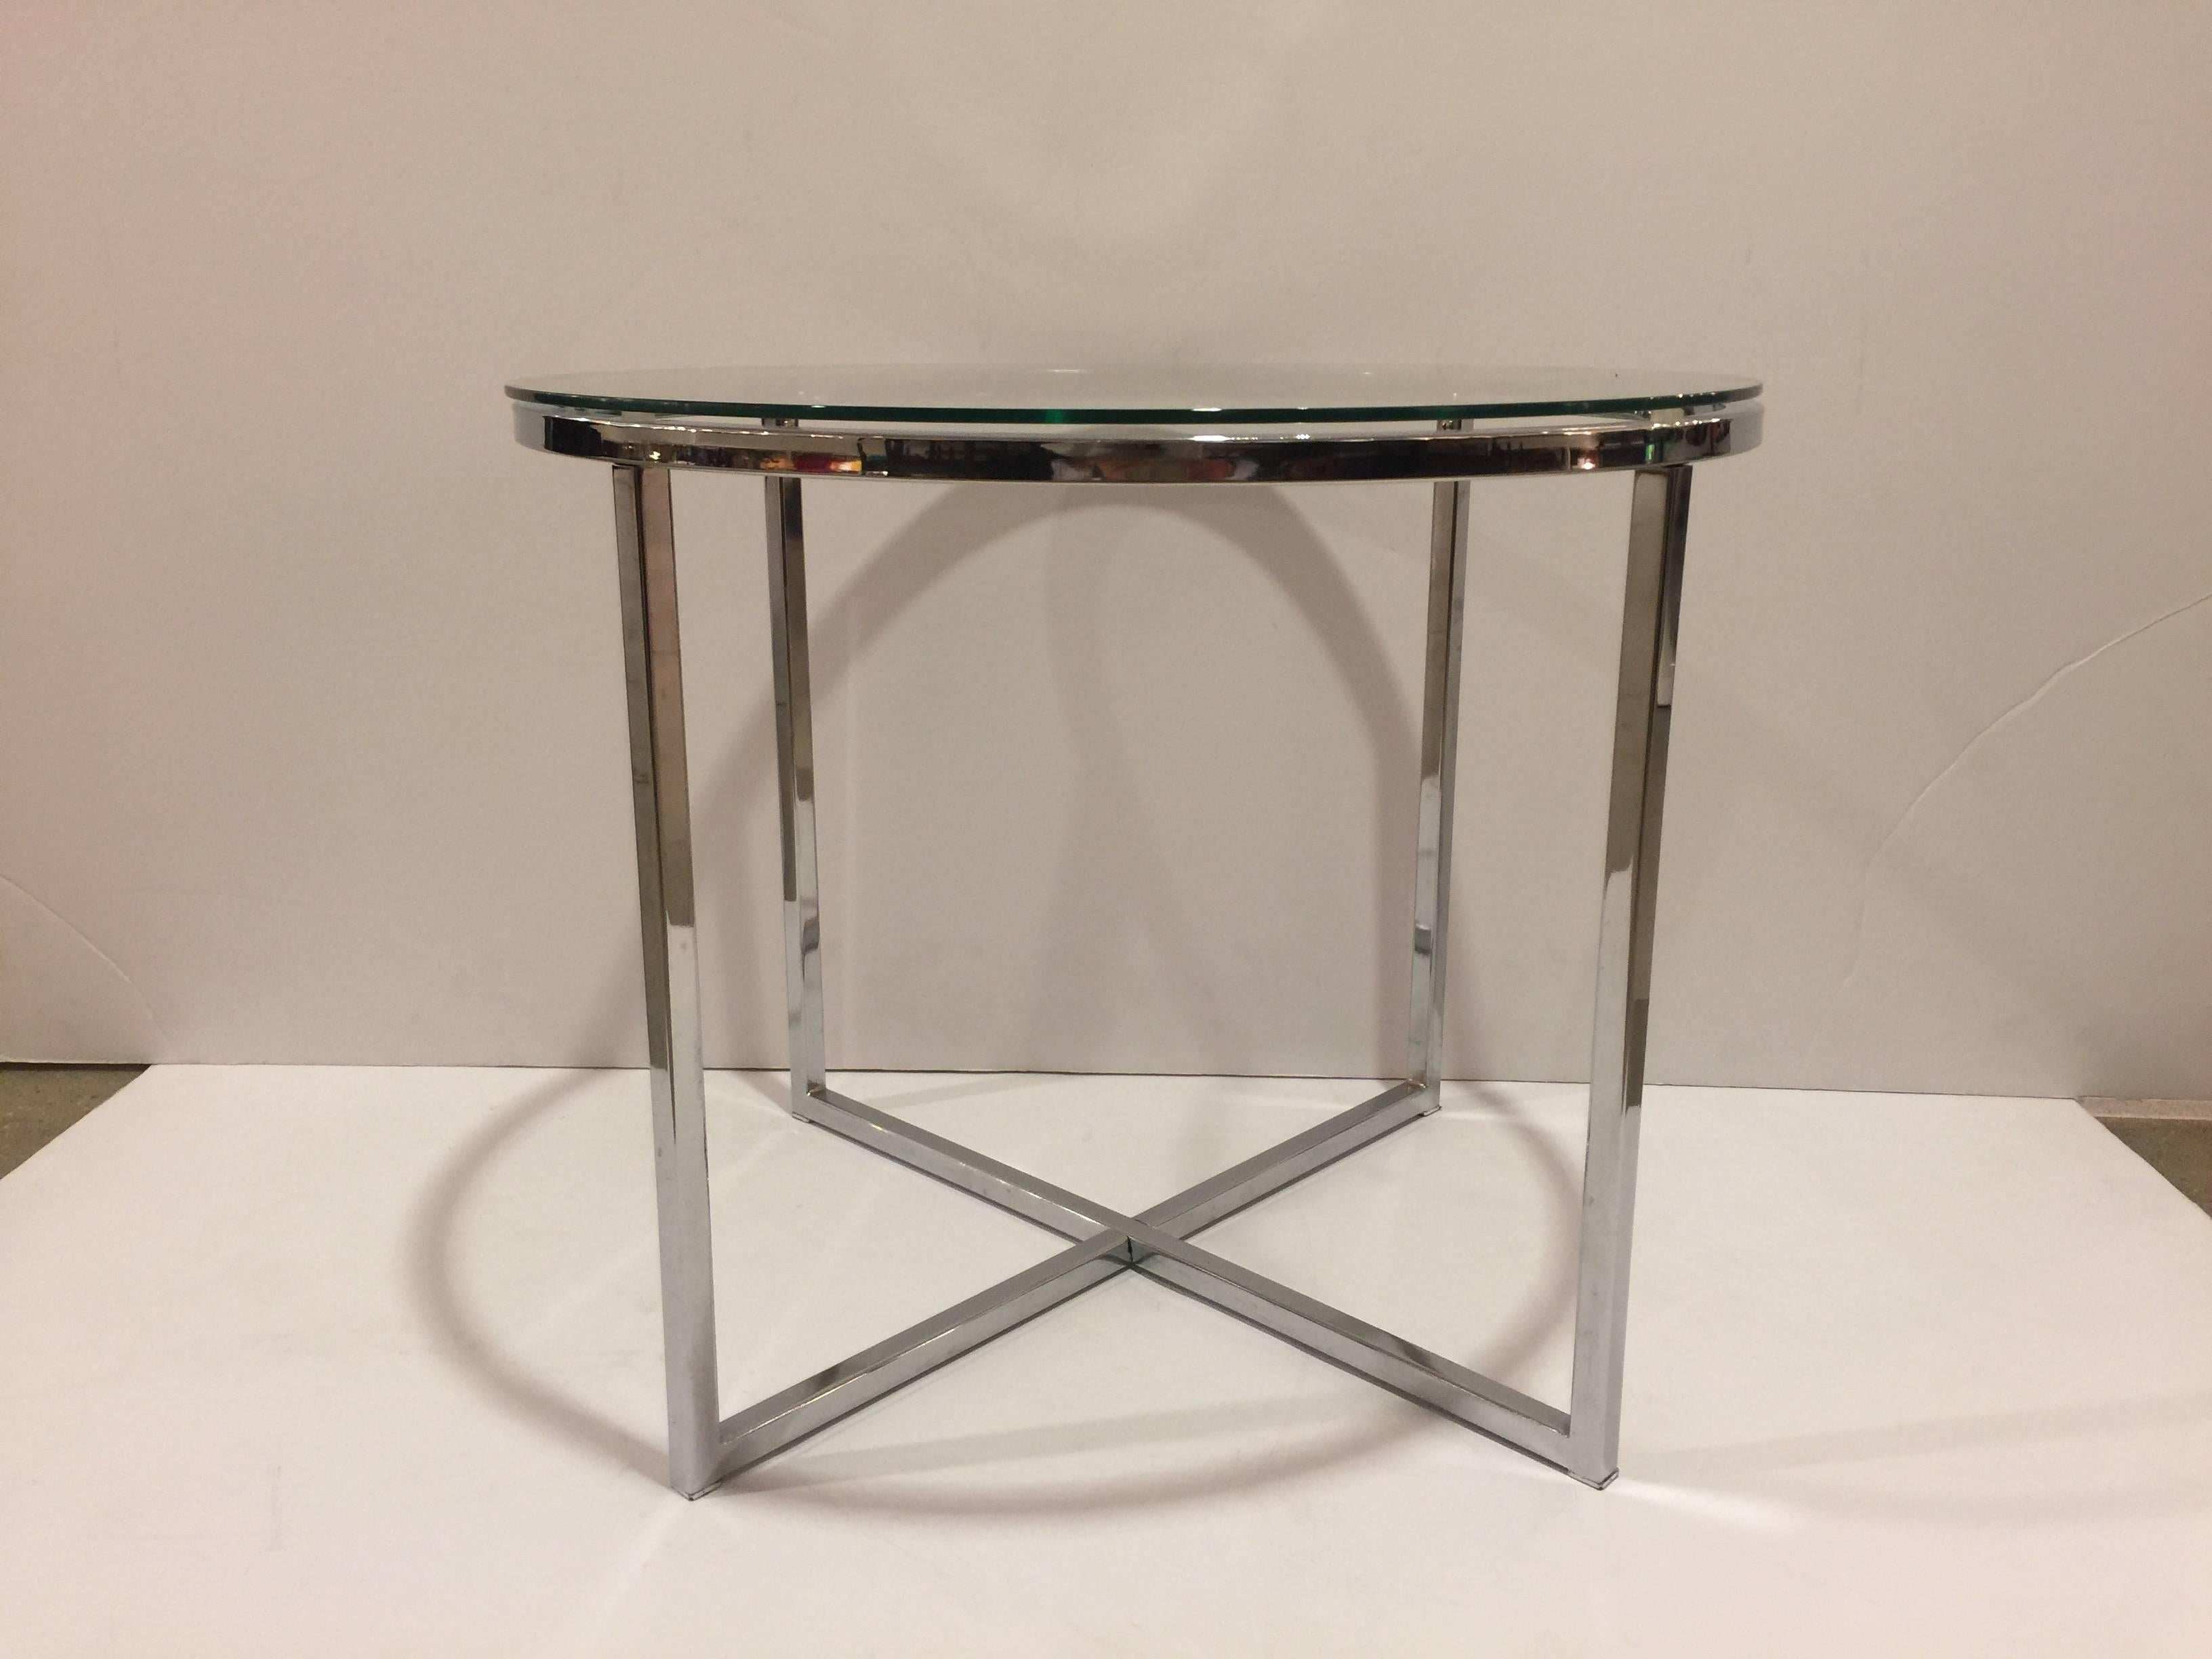 A polished chrome round end table with round glass top and cross-leg base attributed to Milo Baughman. 

USA , circa 1970. 

Unsigned. 

Measures 21.5 inches wide by 17 inches tall.

